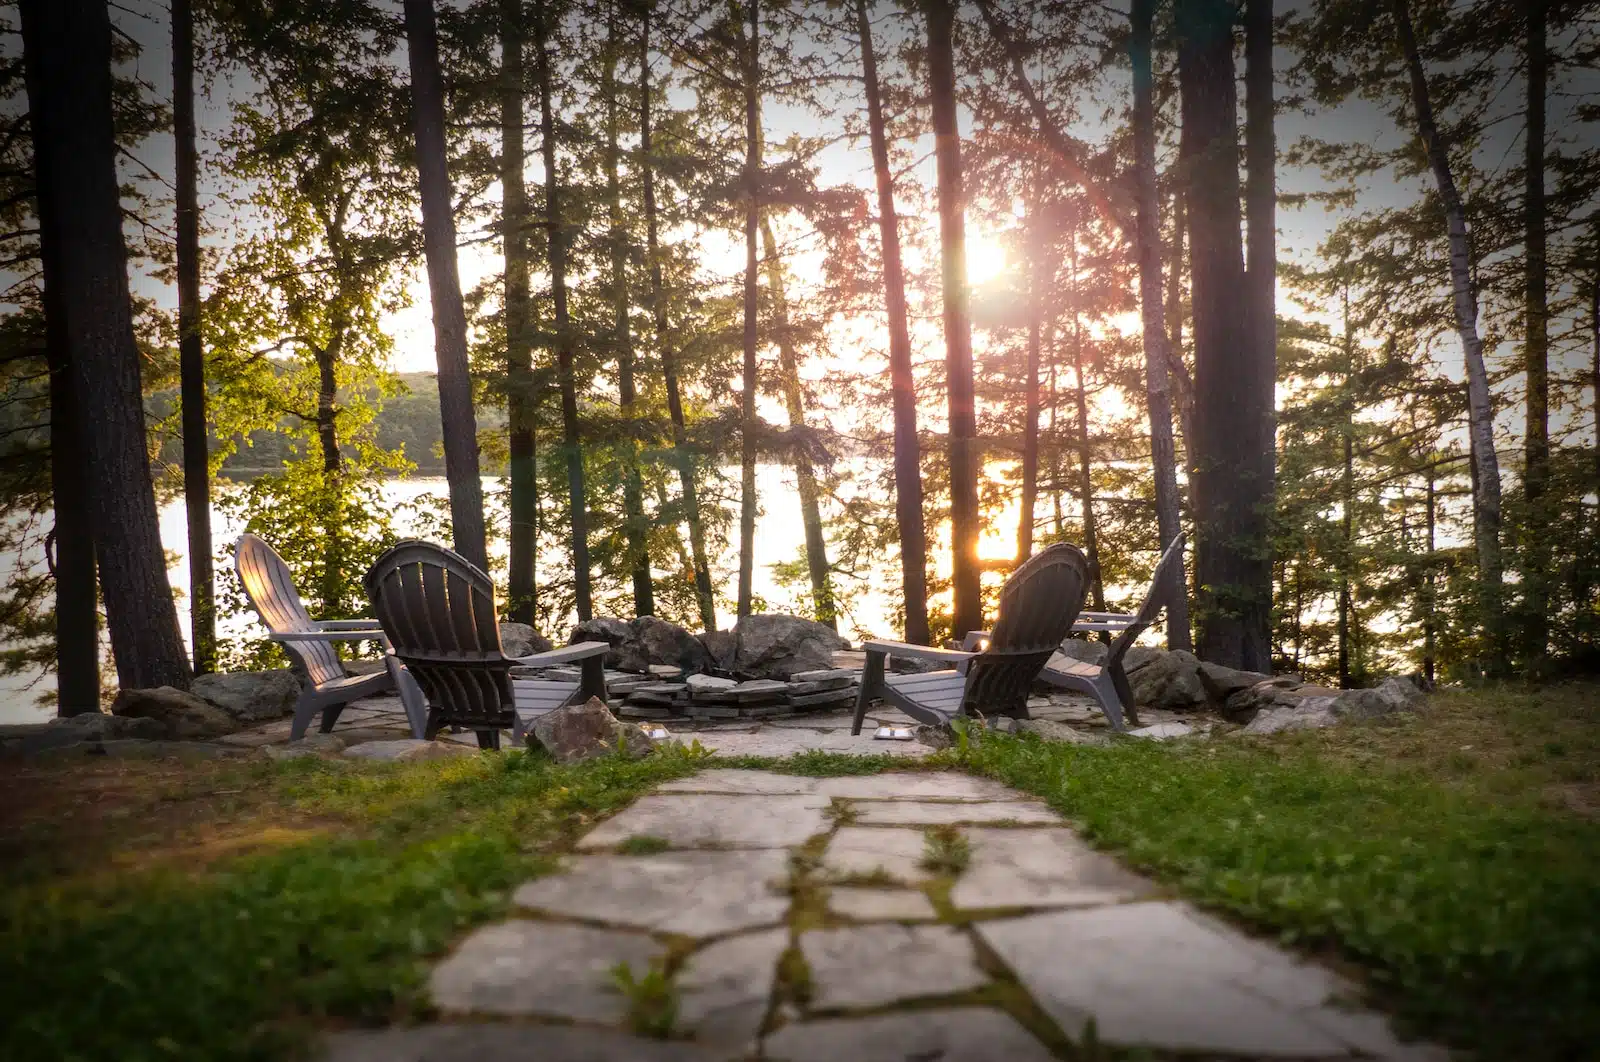 This image depicts a serene outdoor setting in a wooded area near a lake or body of water. The scene features several Adirondack-style wooden chairs arranged on a stone patio or path, surrounded by lush greenery and tall pine trees. The warm, golden light of the setting sun filters through the trees, creating a peaceful and tranquil atmosphere. The overall image conveys a sense of relaxation and connection with nature.